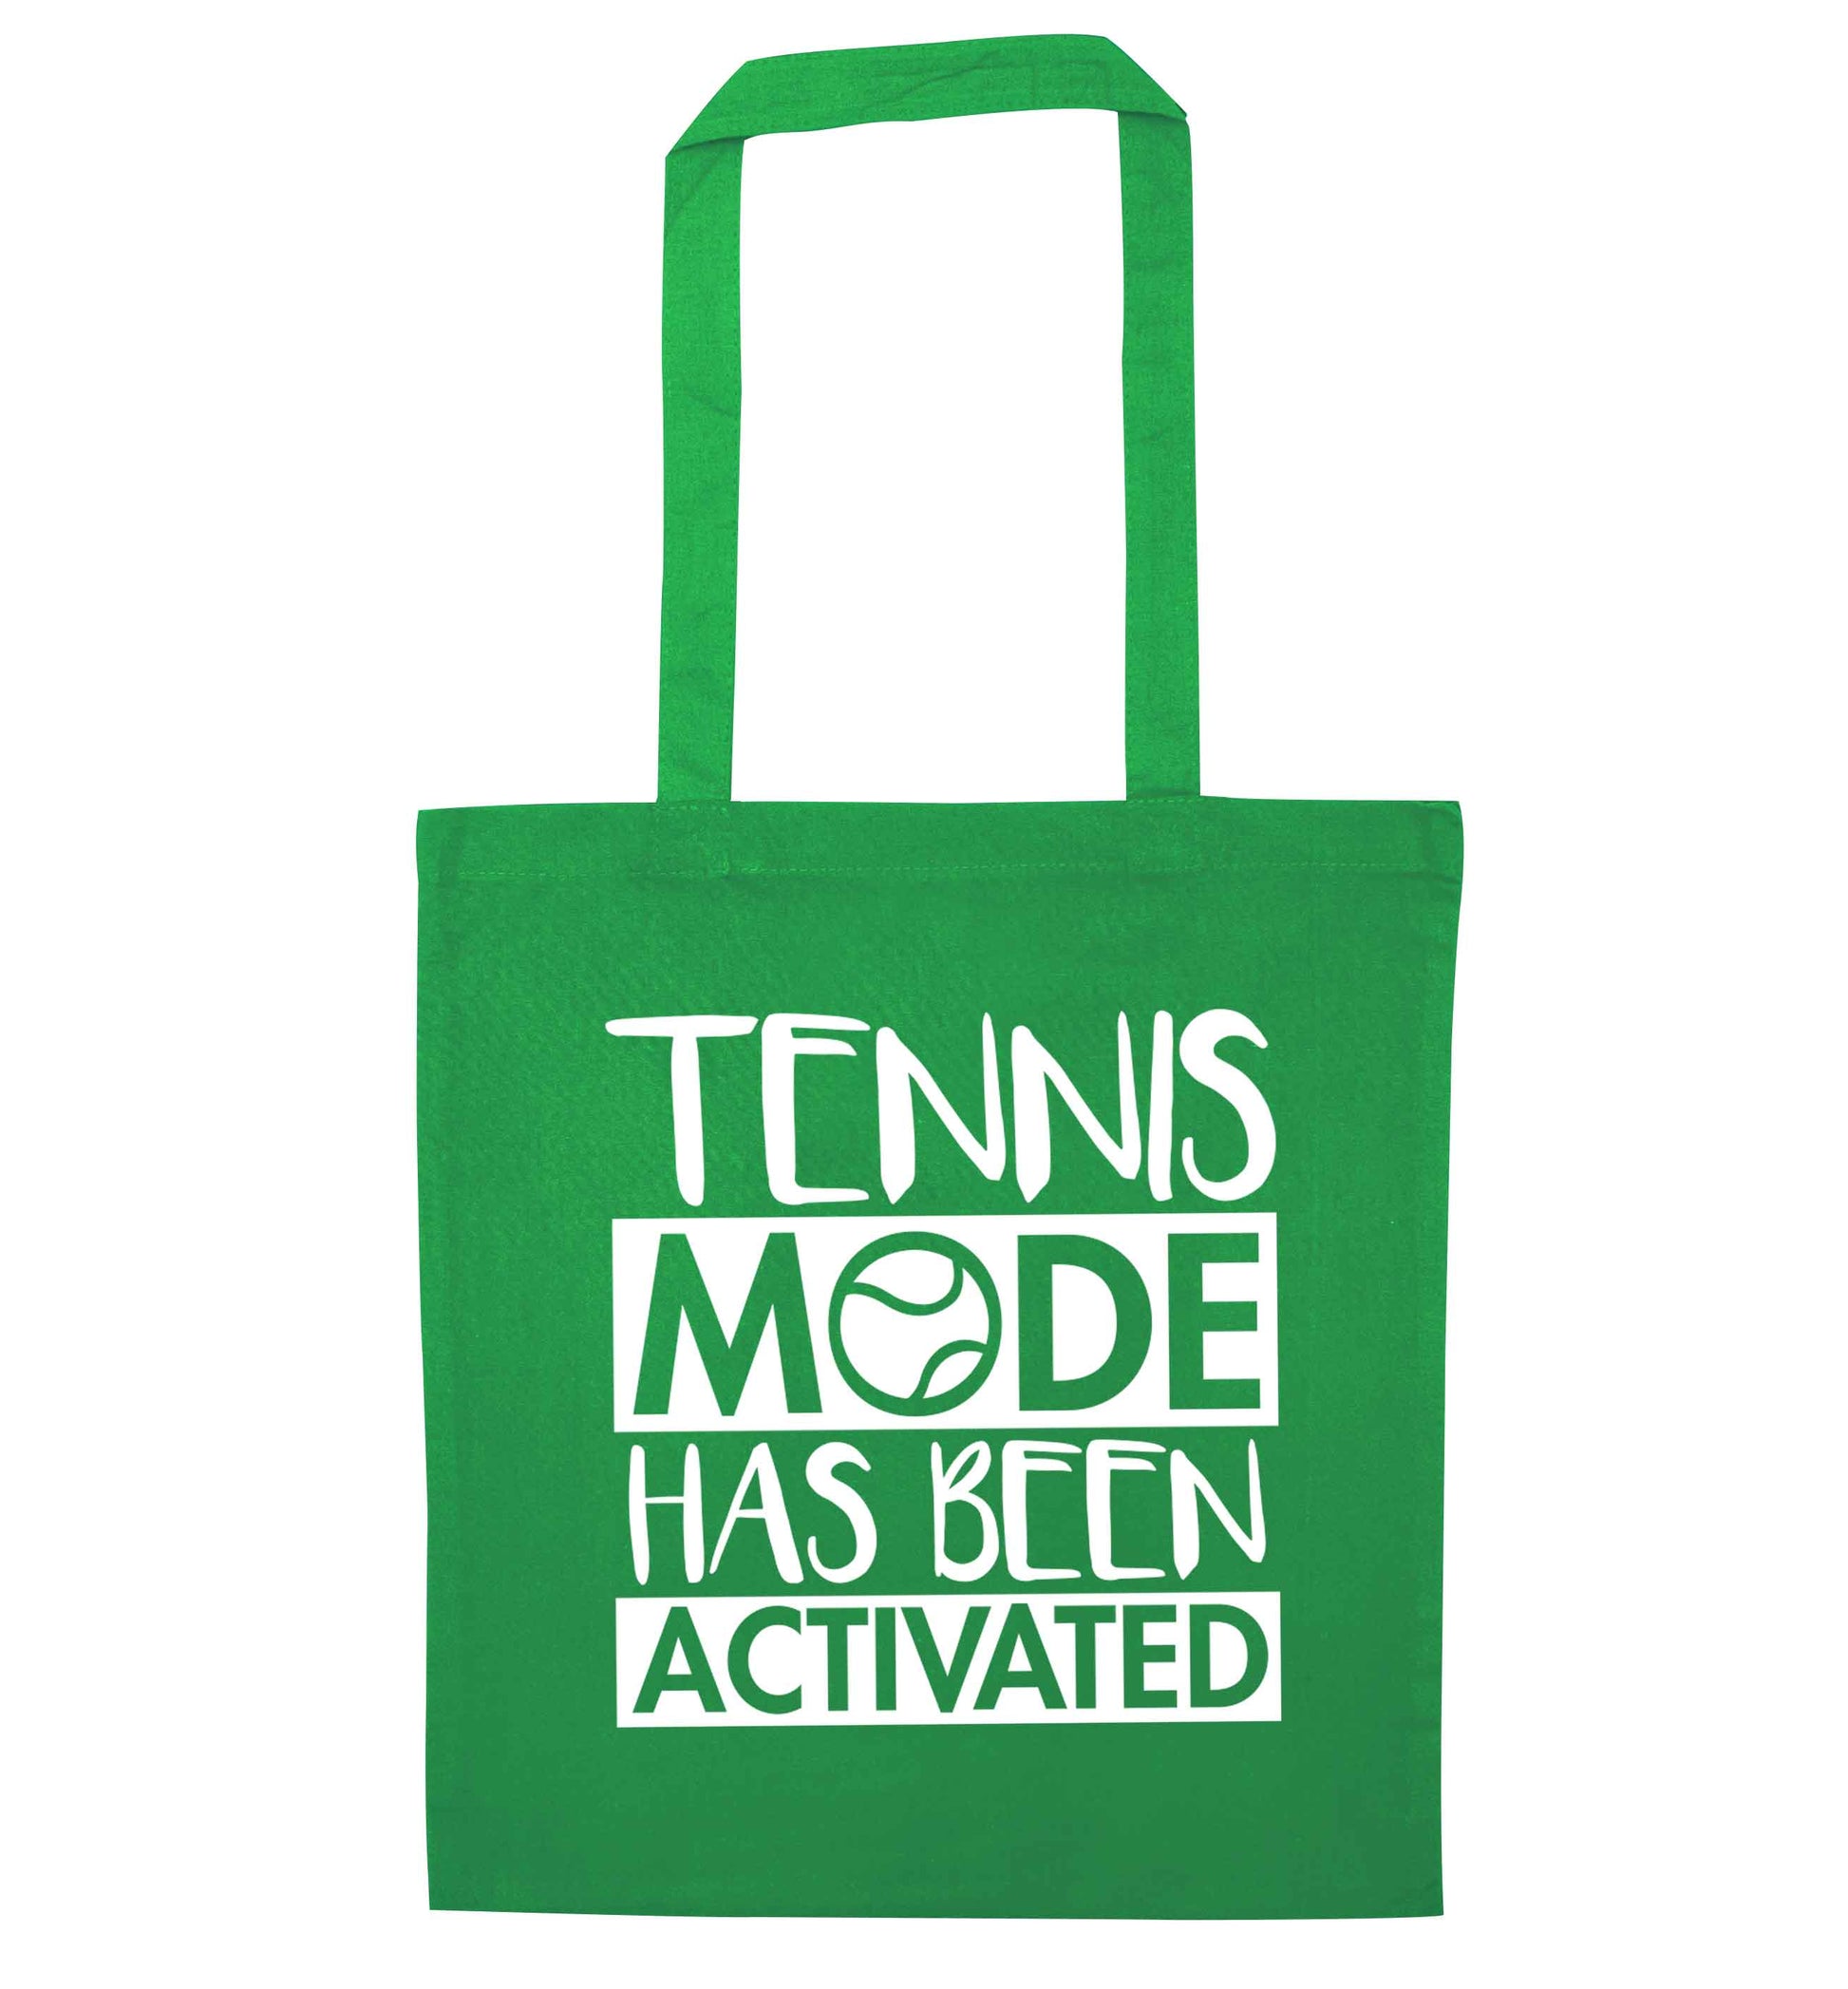 Tennis mode has been activated green tote bag